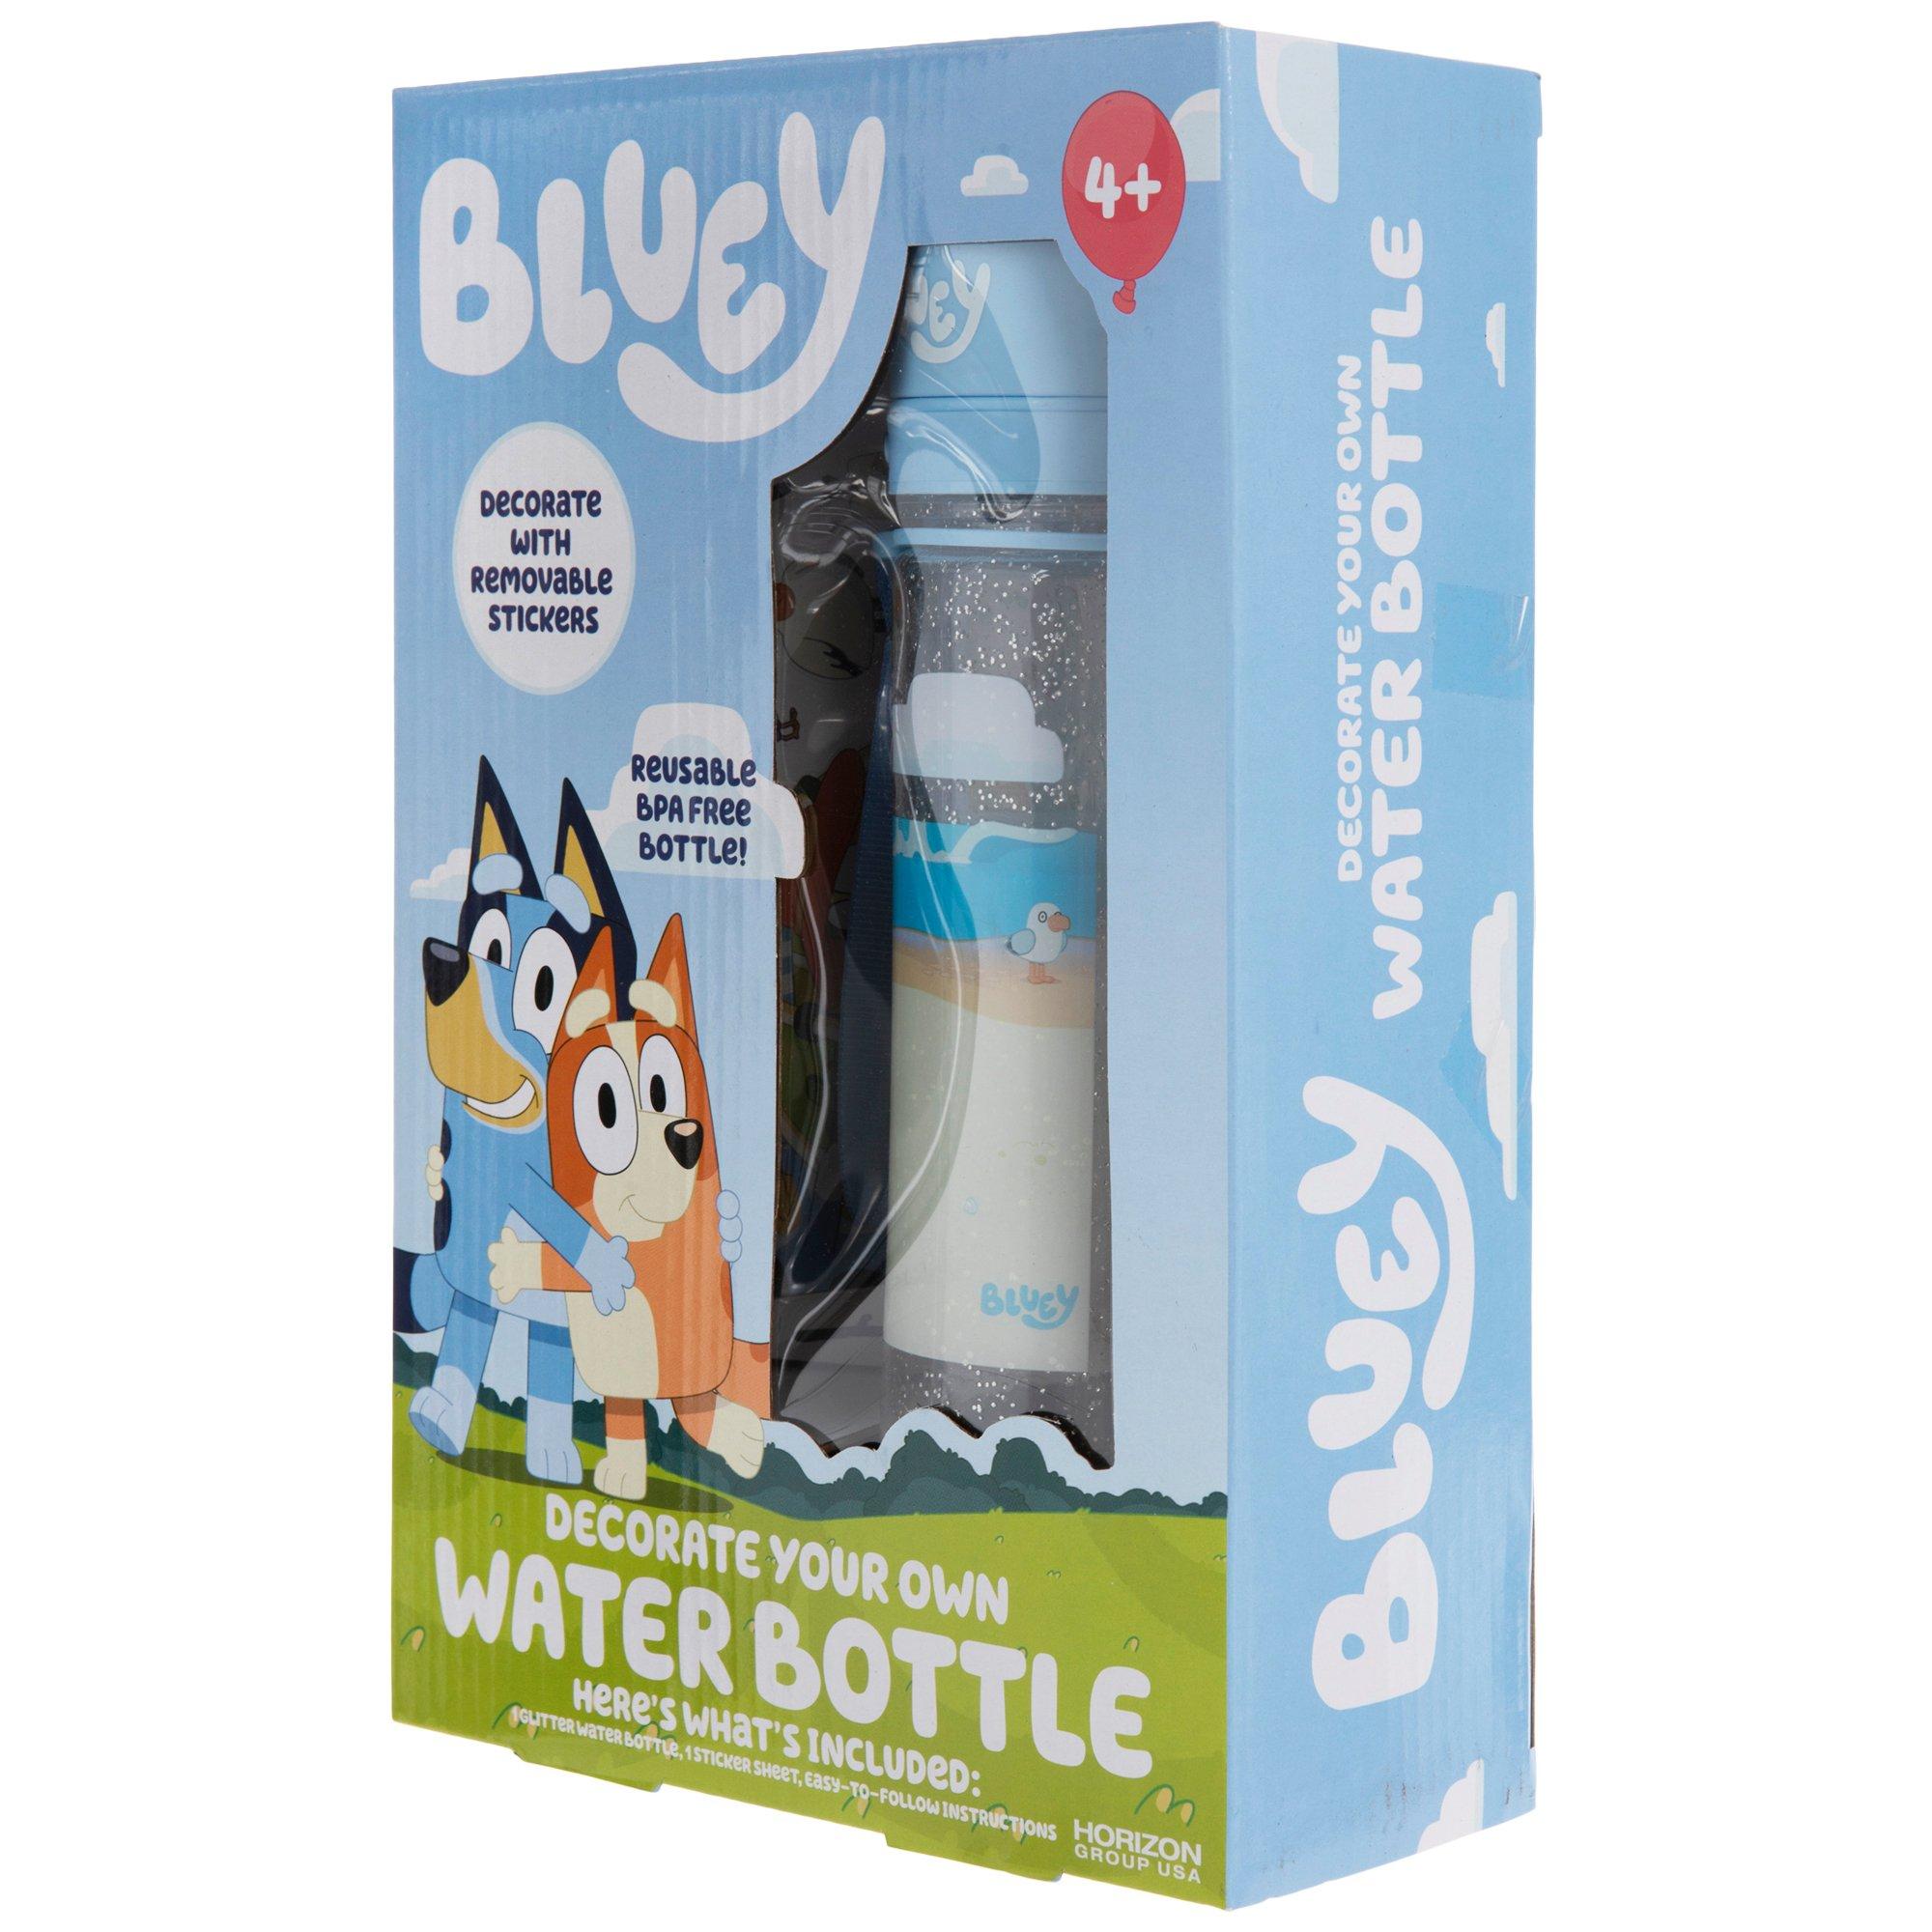 Bluey Decorate Your Own Water Bottle, Repositionable Stickers, Great For  Bluey Birthday Parties, Sum…See more Bluey Decorate Your Own Water Bottle